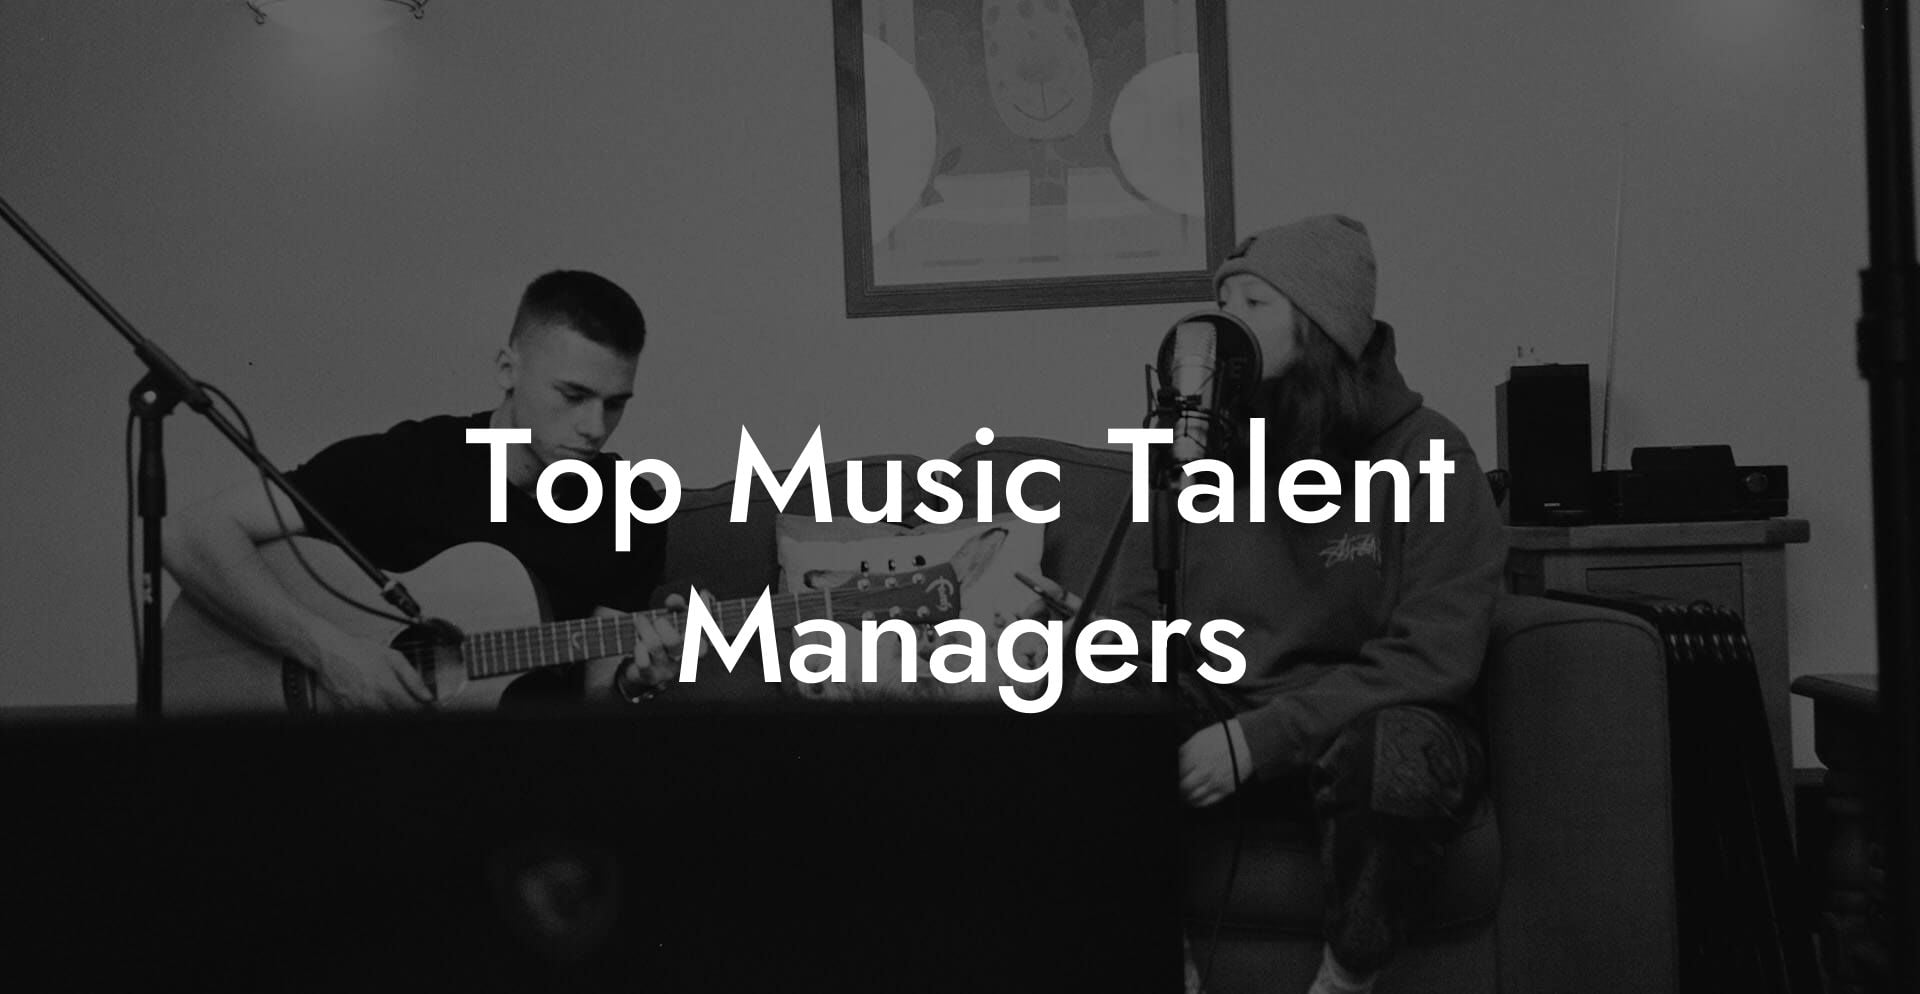 Top Music Talent Managers